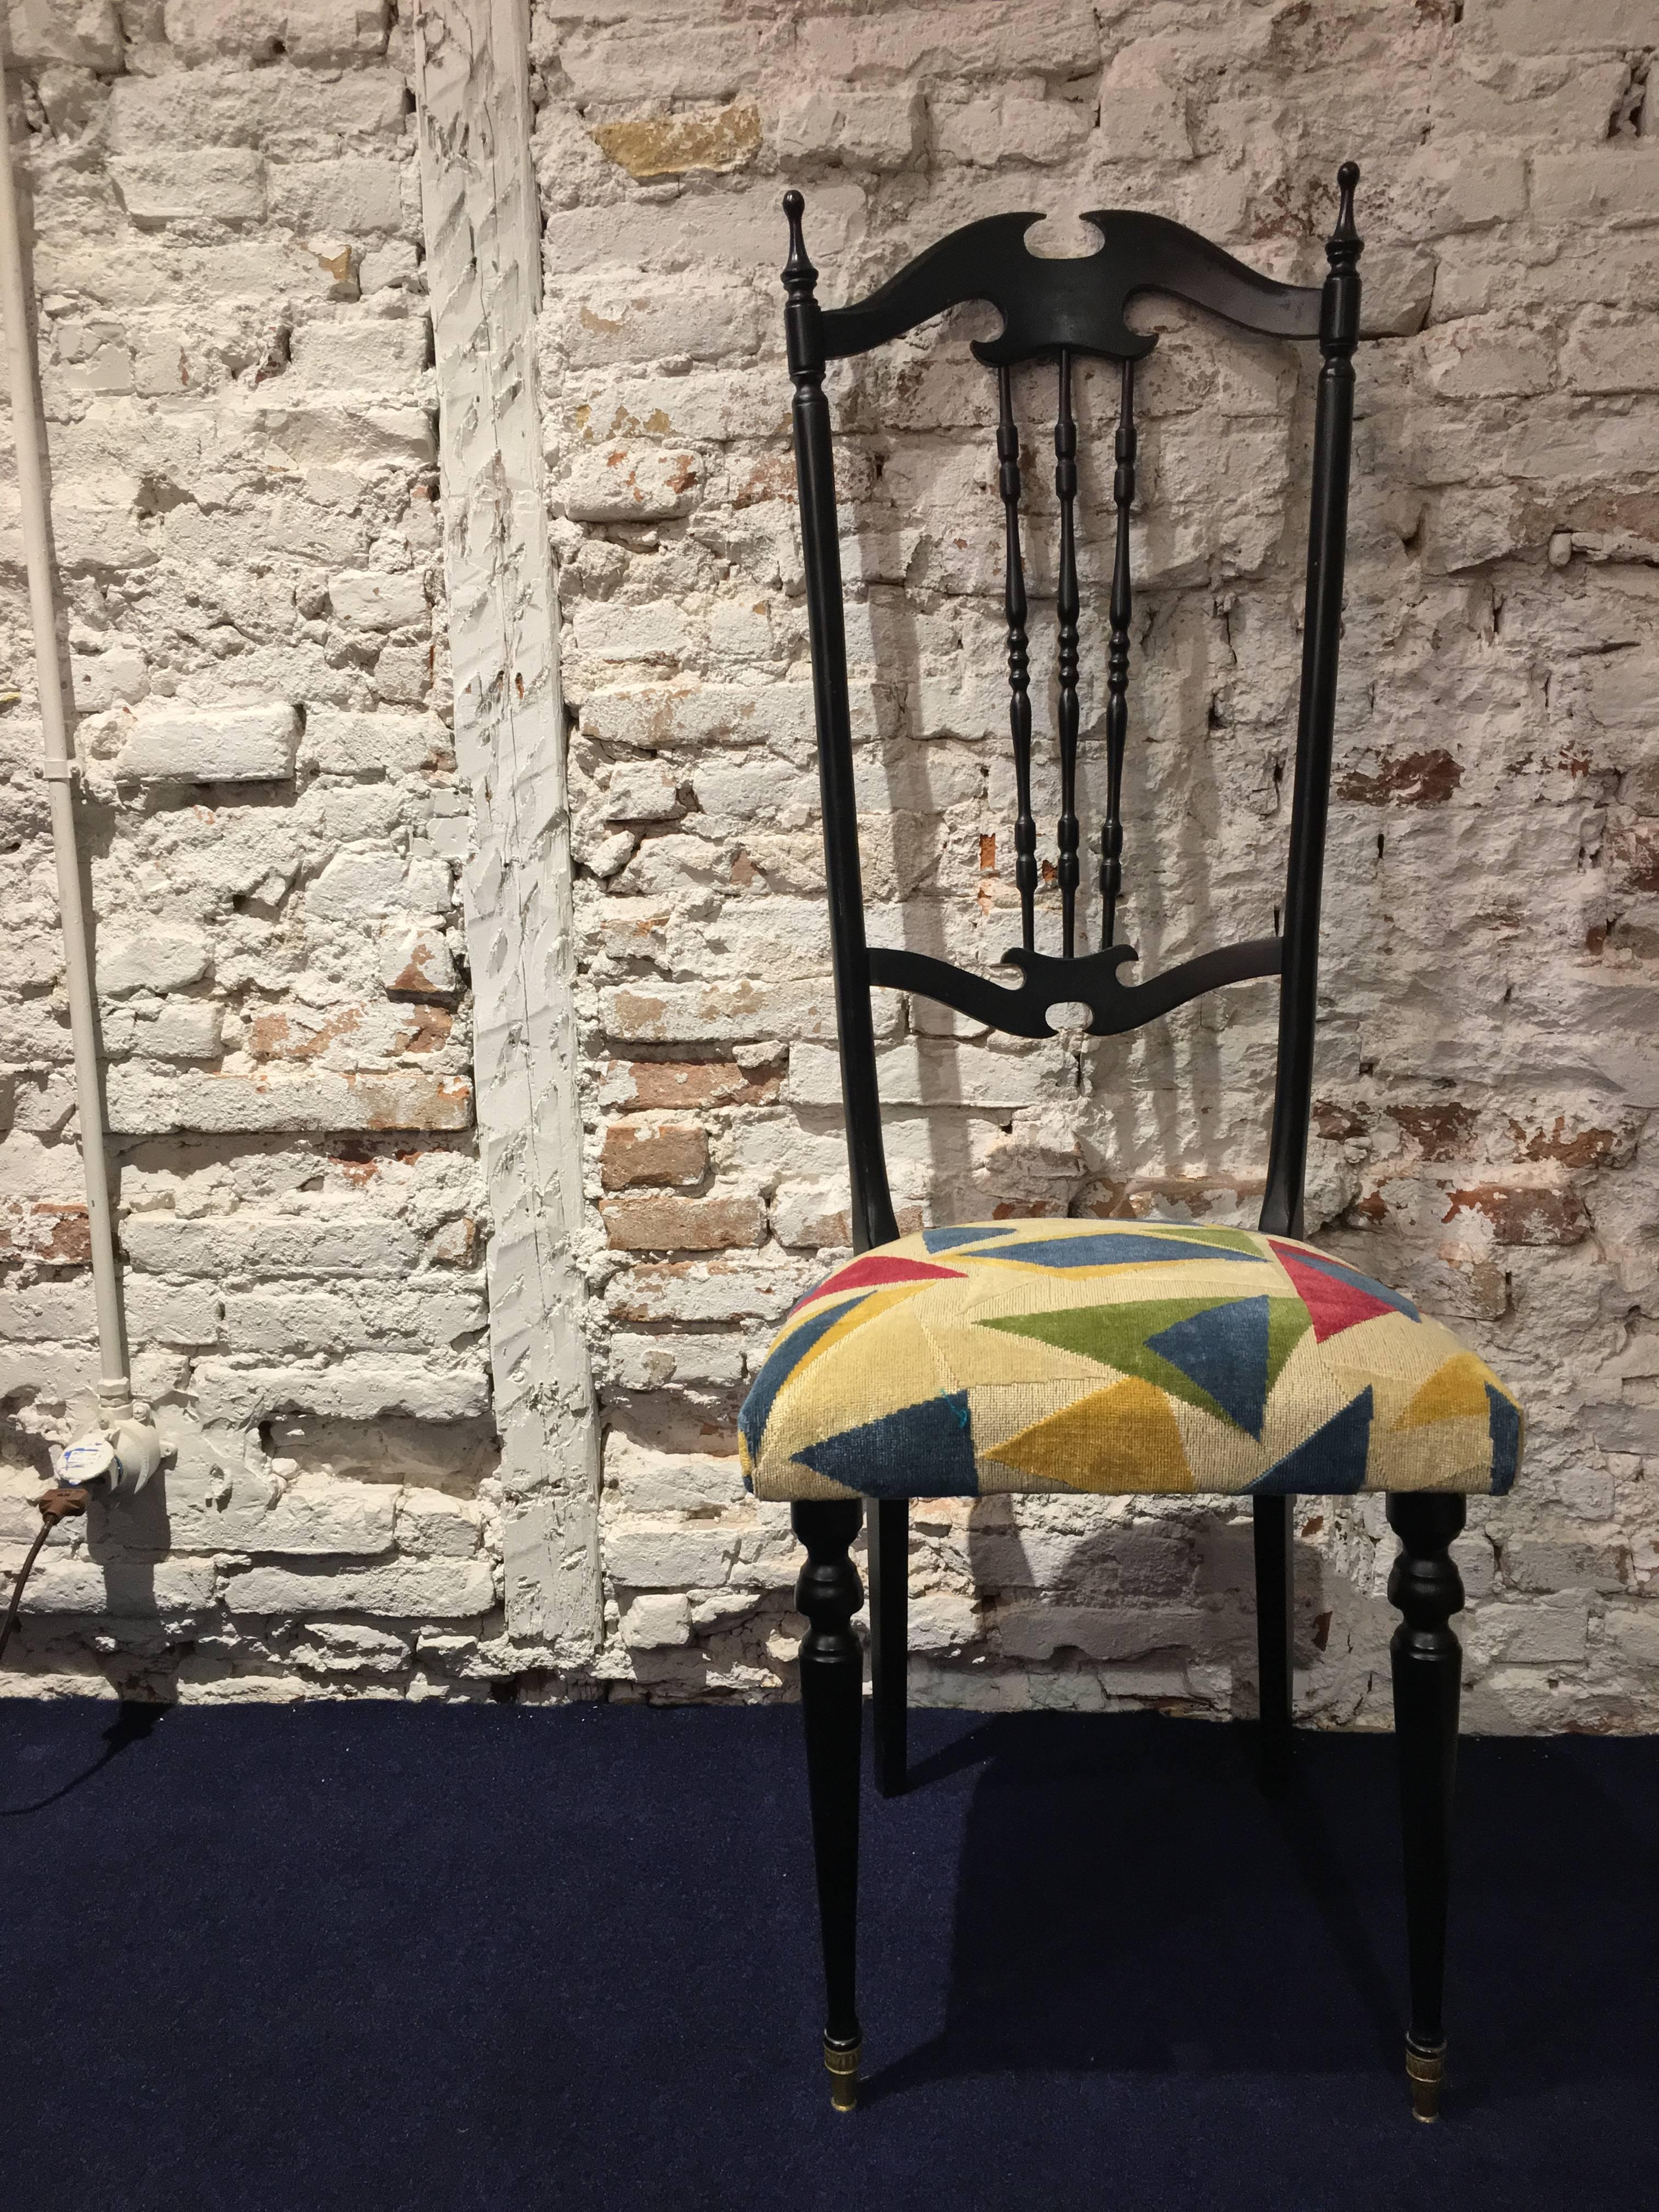 Chiavarina / Chiavari / Chivari / Tiffany chair - Wood lacquered black feet - New upholtery: Clarence house fabric - Handmade in Chiavari Italy - Good vintage condition - There are available two pieces: the price is for one item.

  